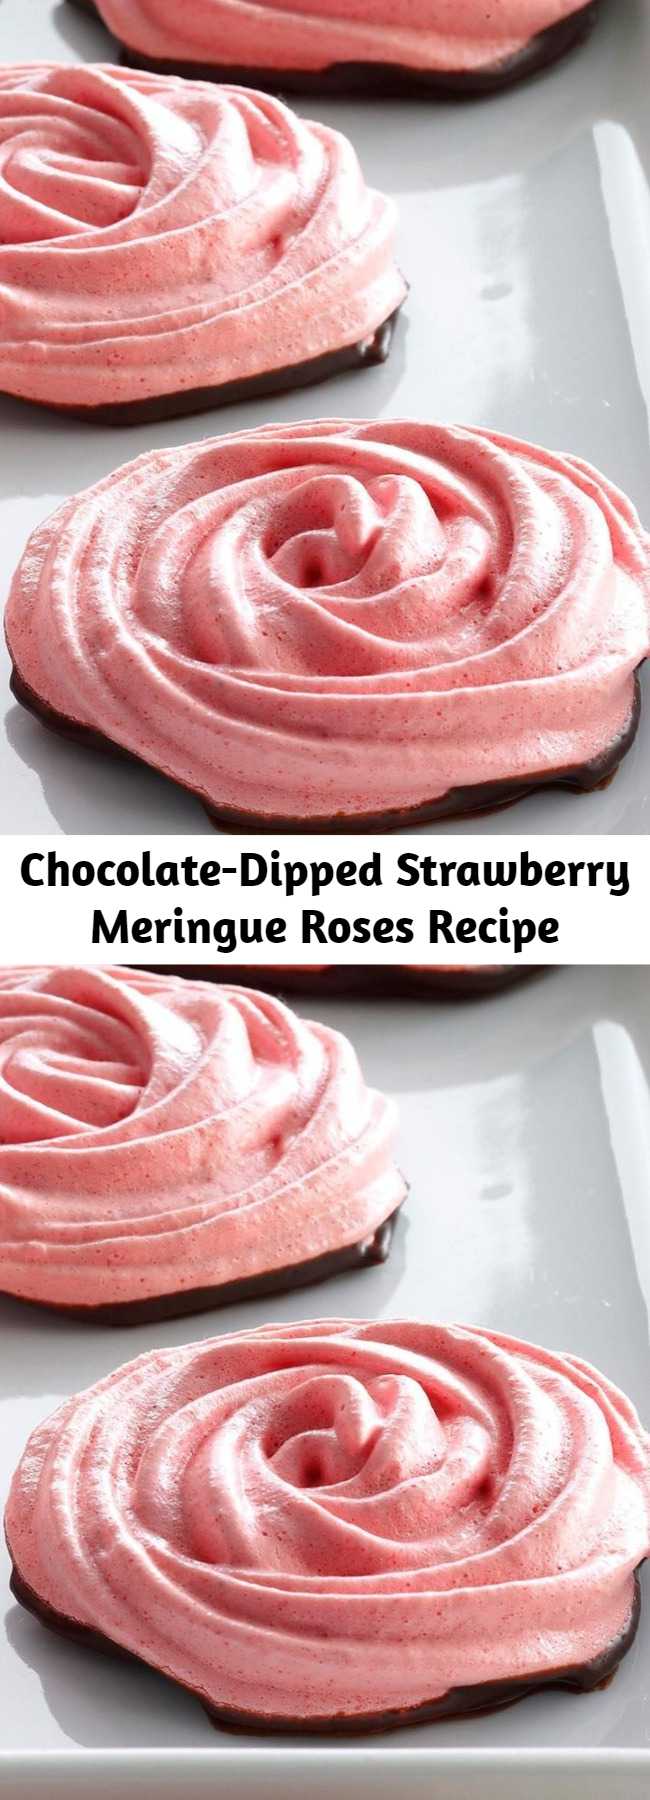 Chocolate-Dipped Strawberry Meringue Roses Recipe - Eat these pretty treats as is, or crush them into a bowl of strawberries and whipped cream. Readers of my blog, utry.it, went nuts when I posted that idea.